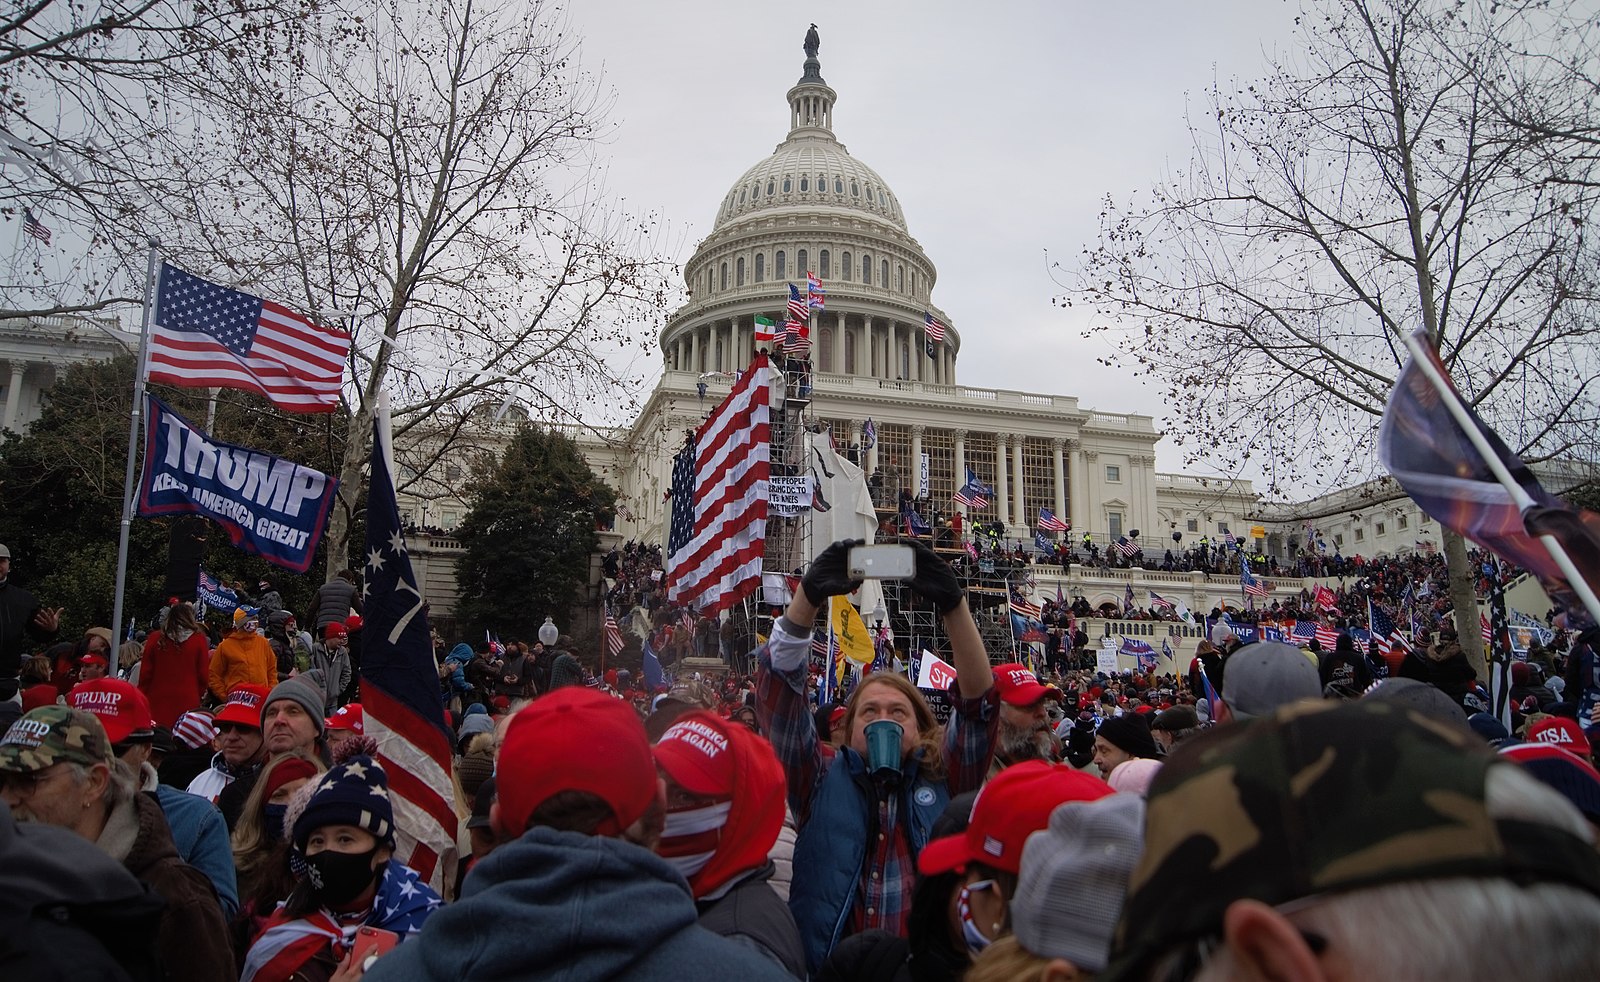 A mob with American flags and Trump banners storms the U.S. Capitol in Washington, D.C., on January 6, 2021.